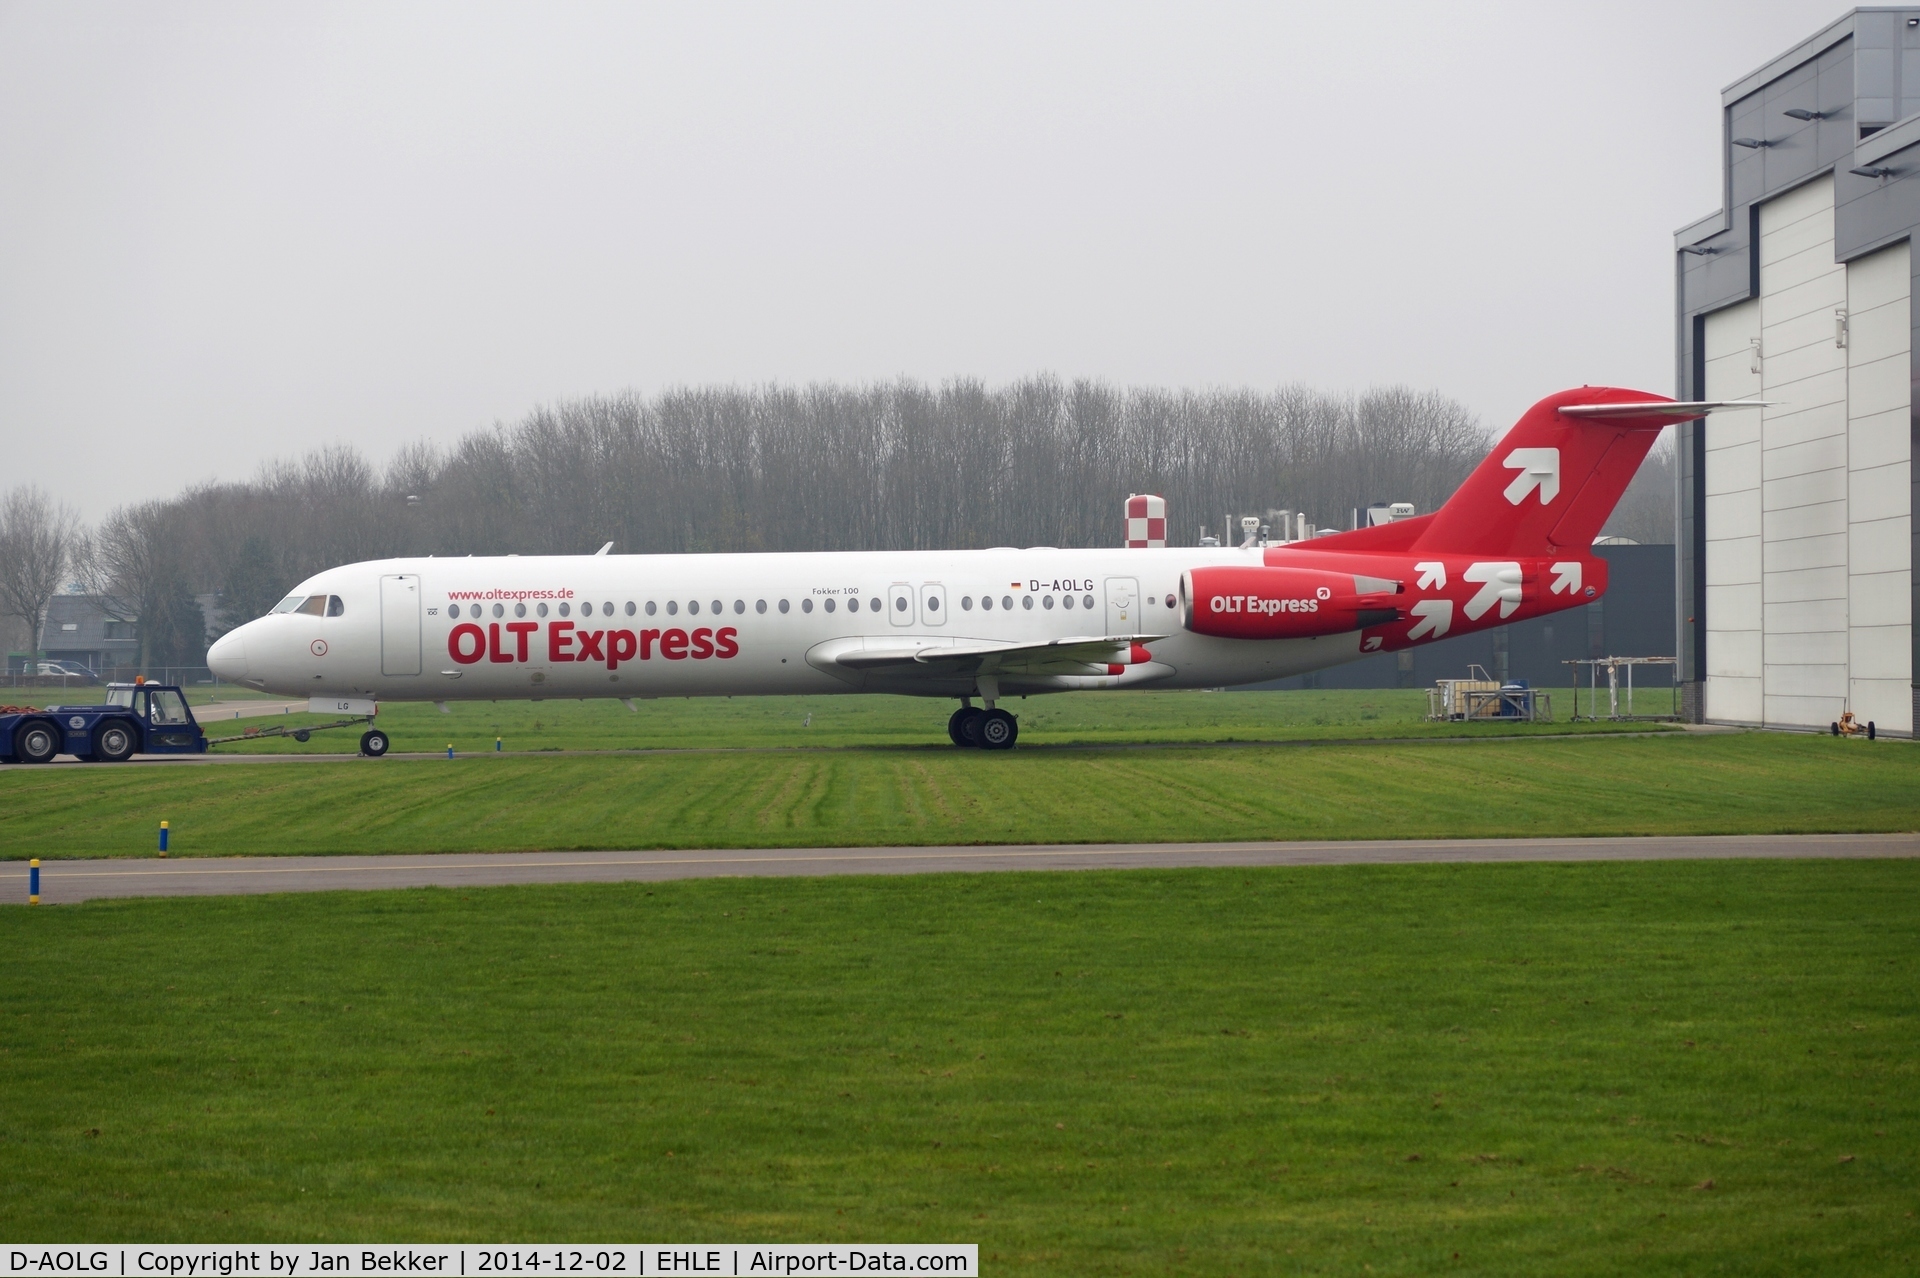 D-AOLG, 1993 Fokker 100 (F-28-0100) C/N 11452, Just arrived at Lelystad Airport to get a new livery. (Avantiair)